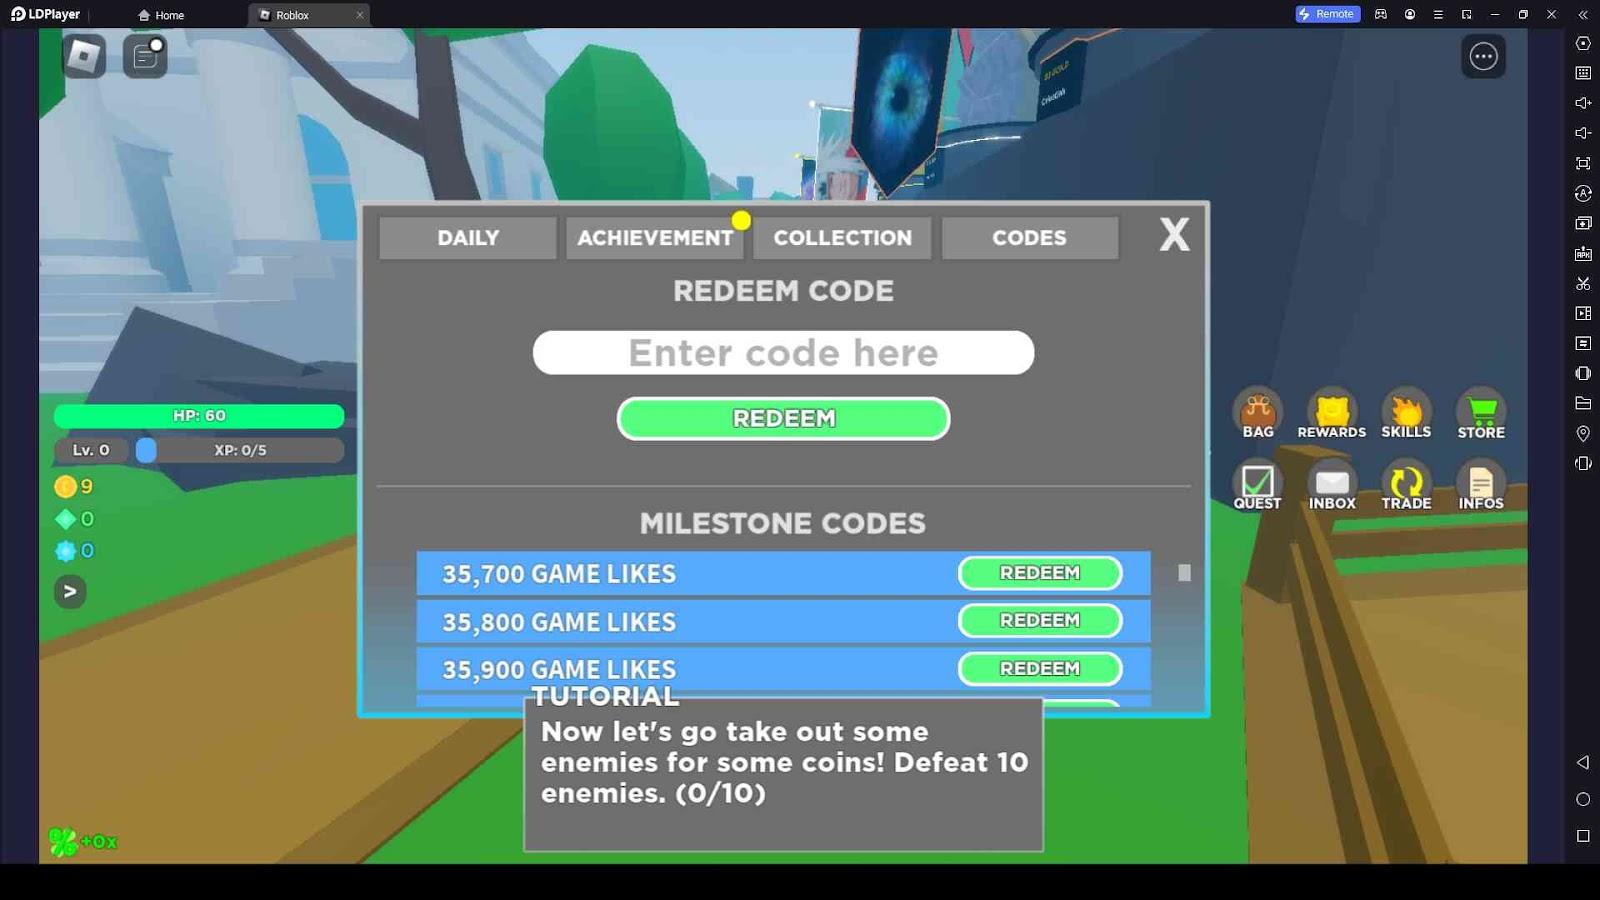 How to Redeem Code in Roblox Pc? Roblox Promo Codes Redeem Page or